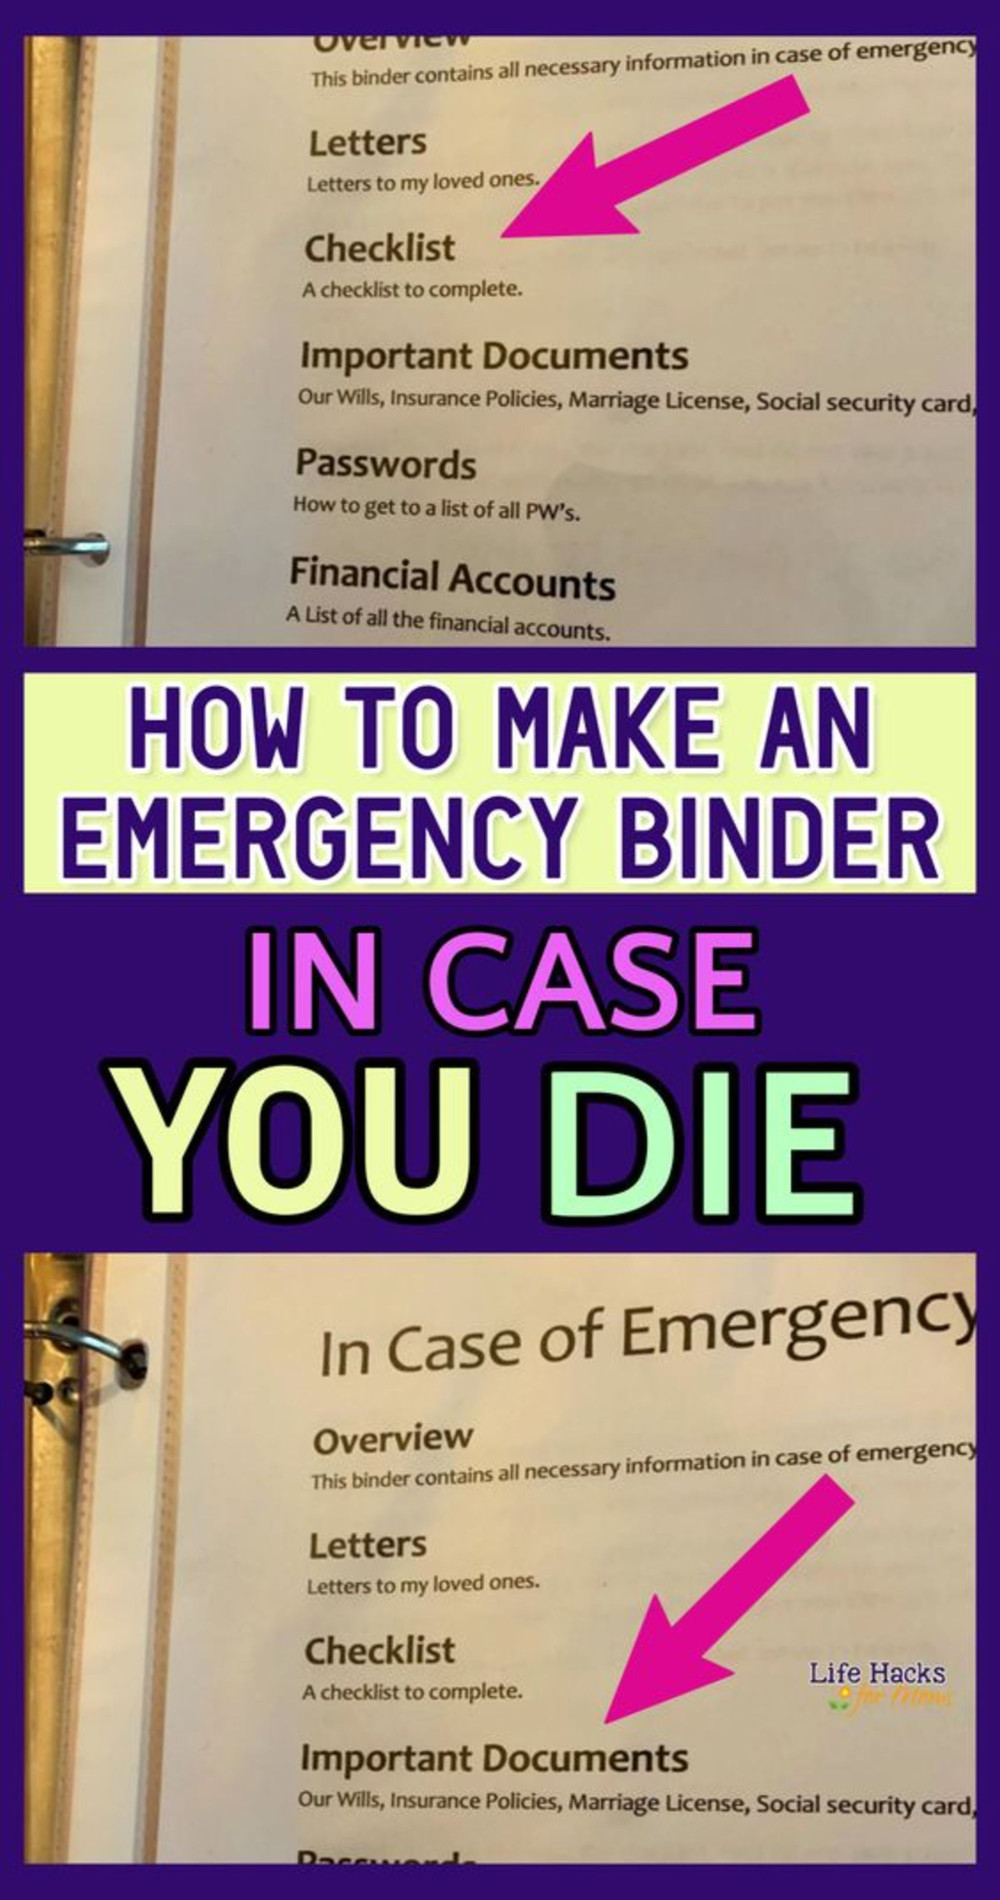 How To Make AN Emergency Binder In Case You Die - Important Documents Binder Checklist